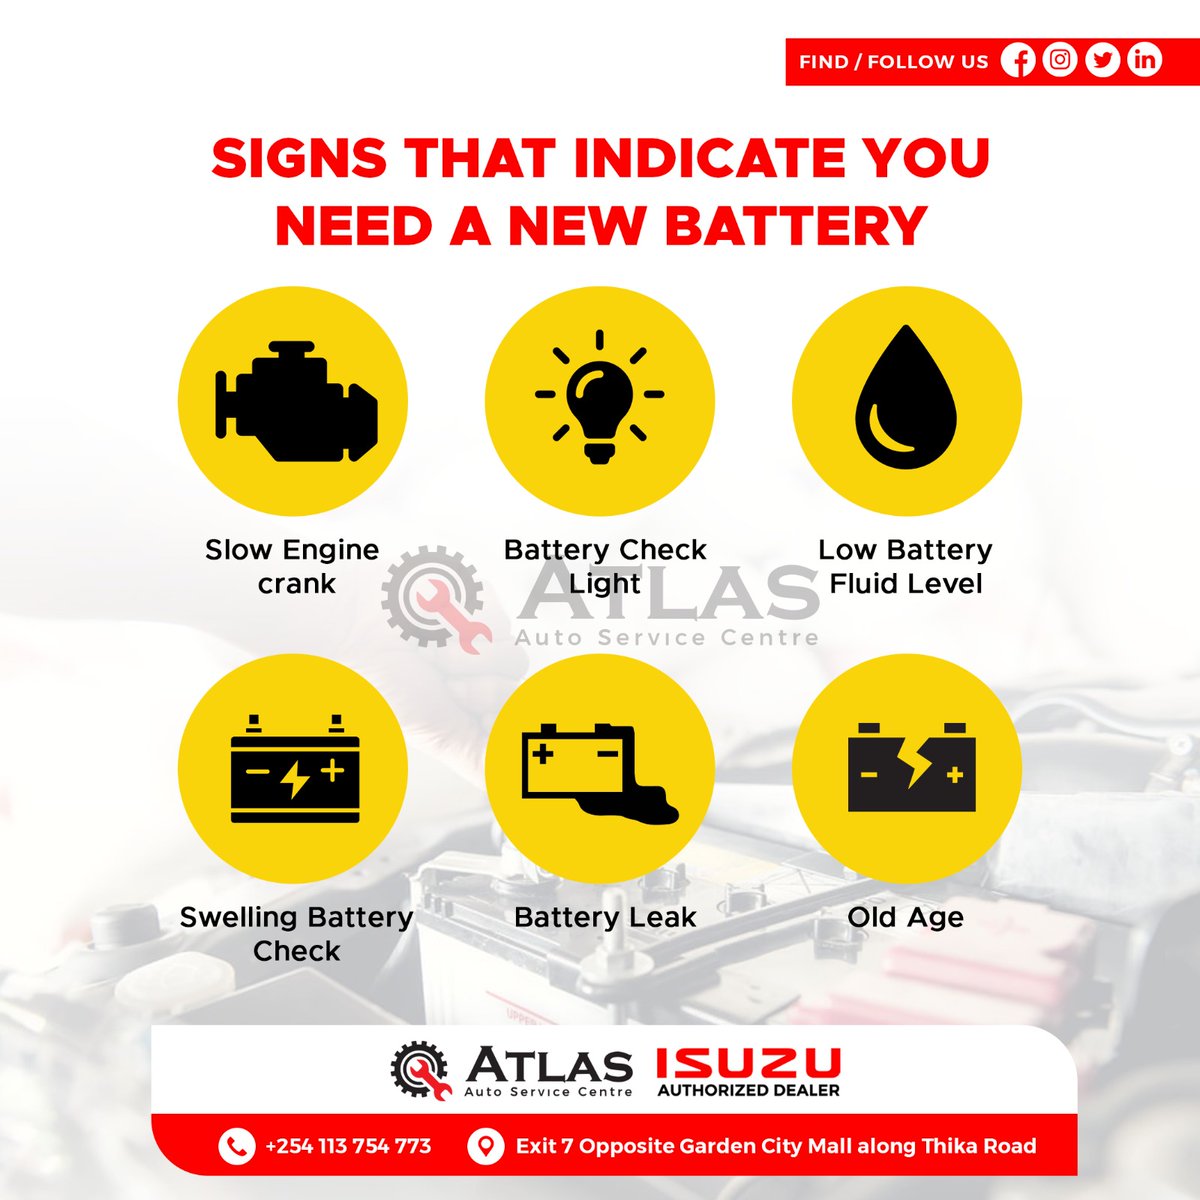 Is it time for a new battery? 🔋 Don't ignore the signs! From slow starts to dim lights, learn the indicators that it's time for a fresh power source for your car.#howcanwehelp #garage #isuzu #CarCare #BatteryReplacement #StayCharged #NVIDIA #bloodbath #BrianChira